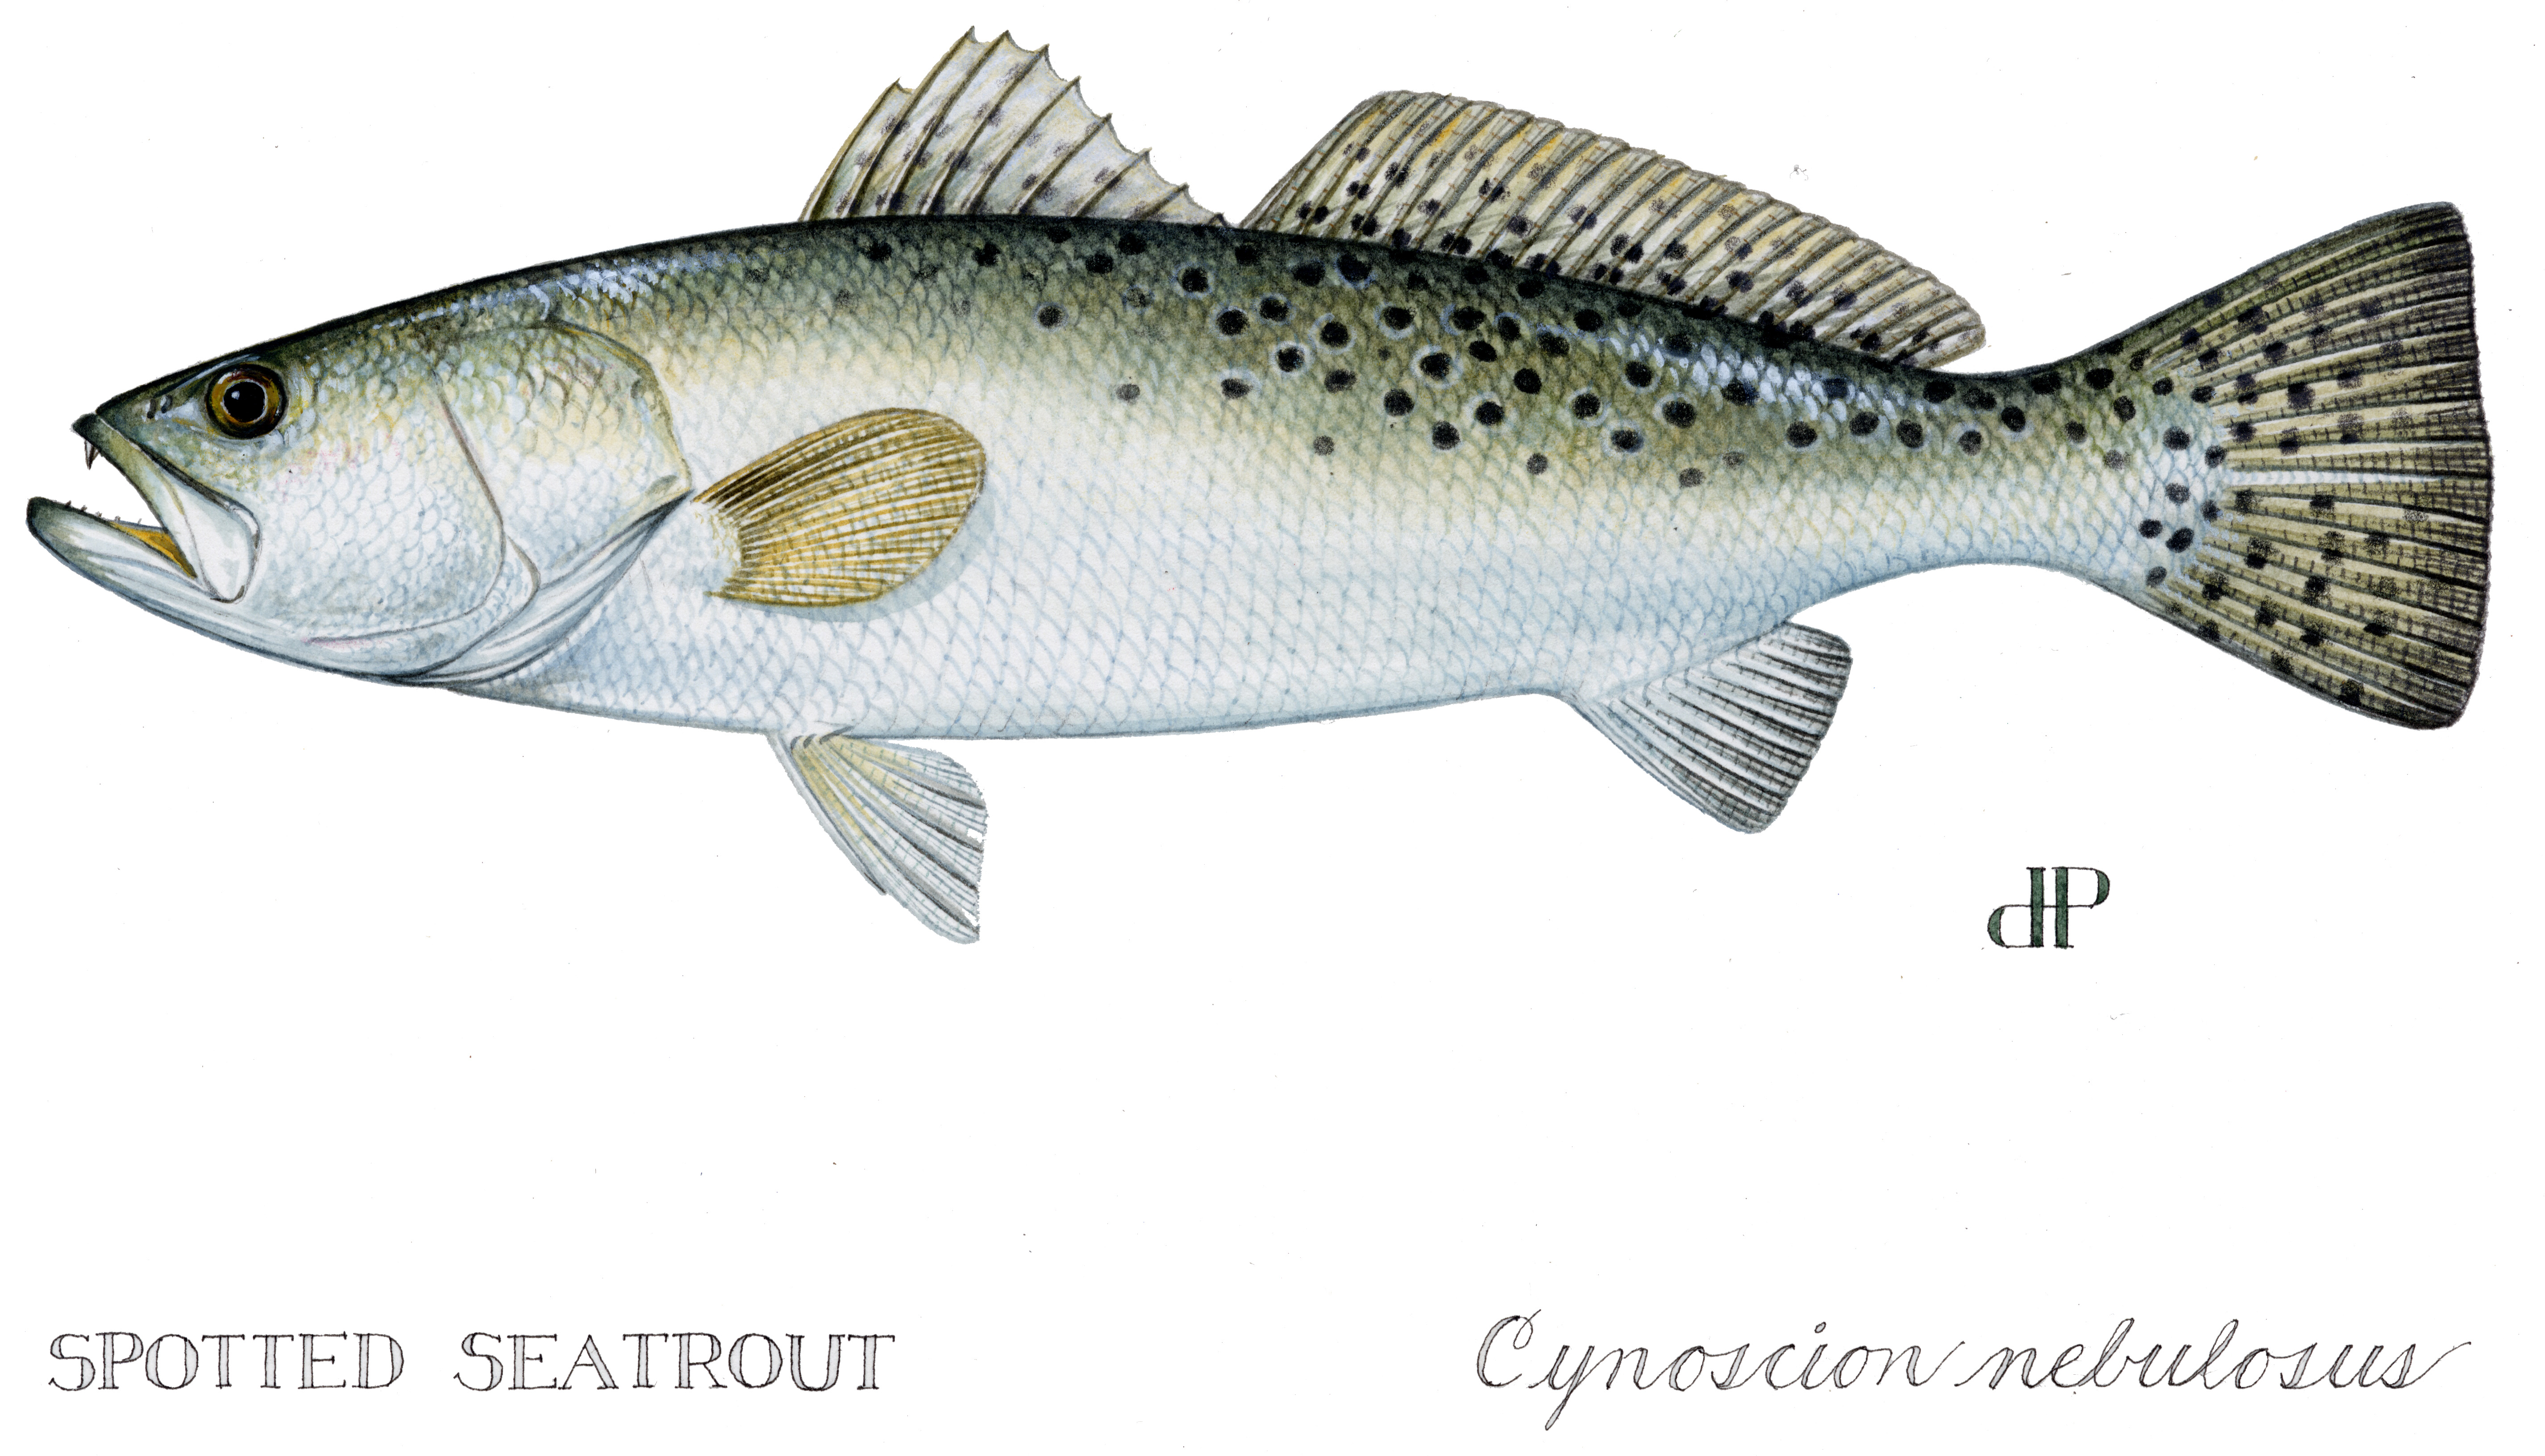 The Spotted Sea Trout - Visit Natural North Florida